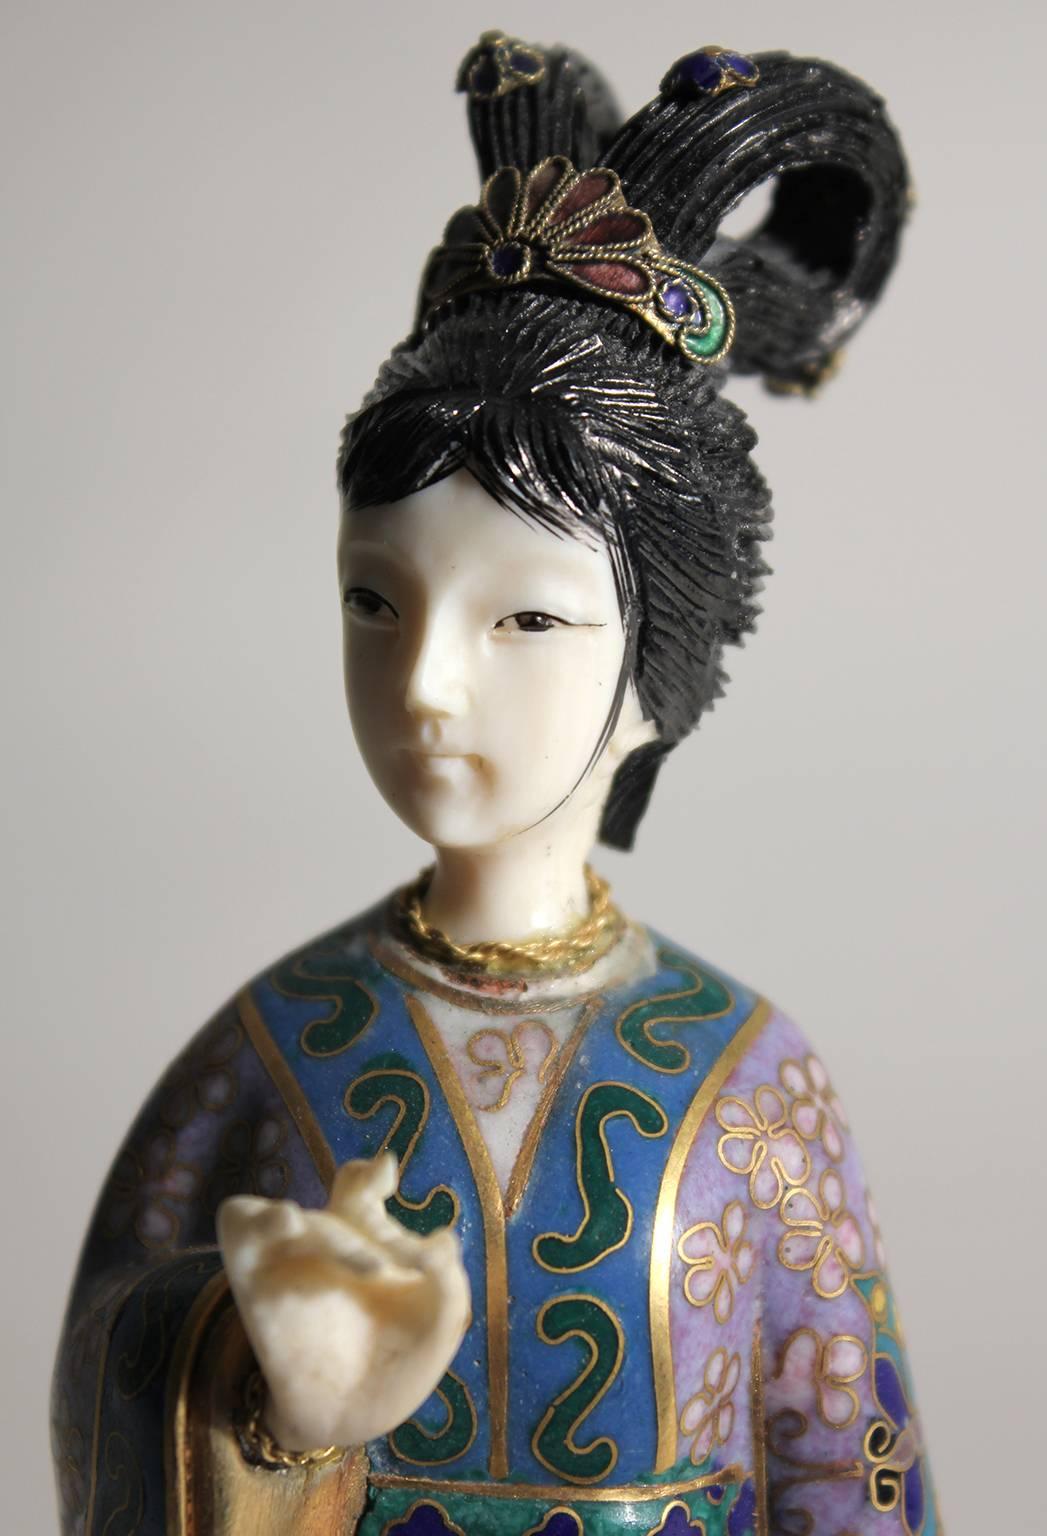 Antique Chinese Cloisonne Enameled Carved Guanyin Quan Yin Sculpture Figurine 2